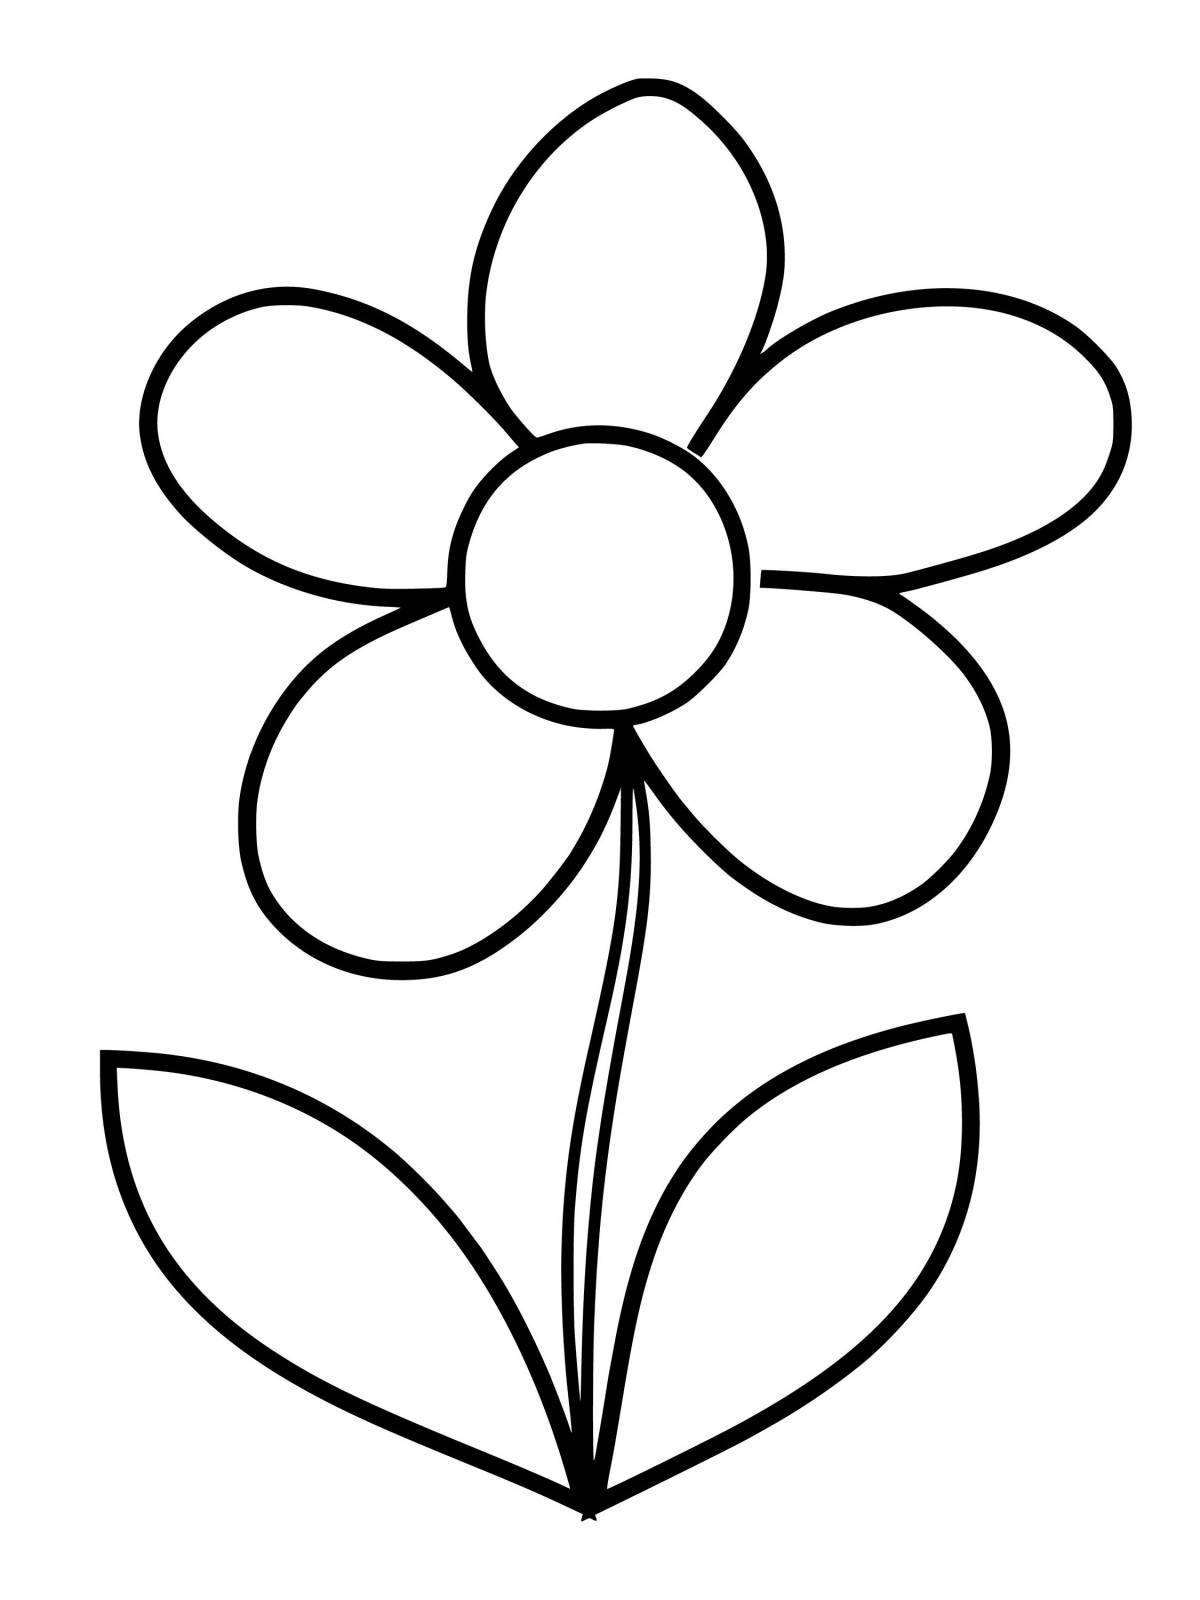 Camomile flower coloring book for kids